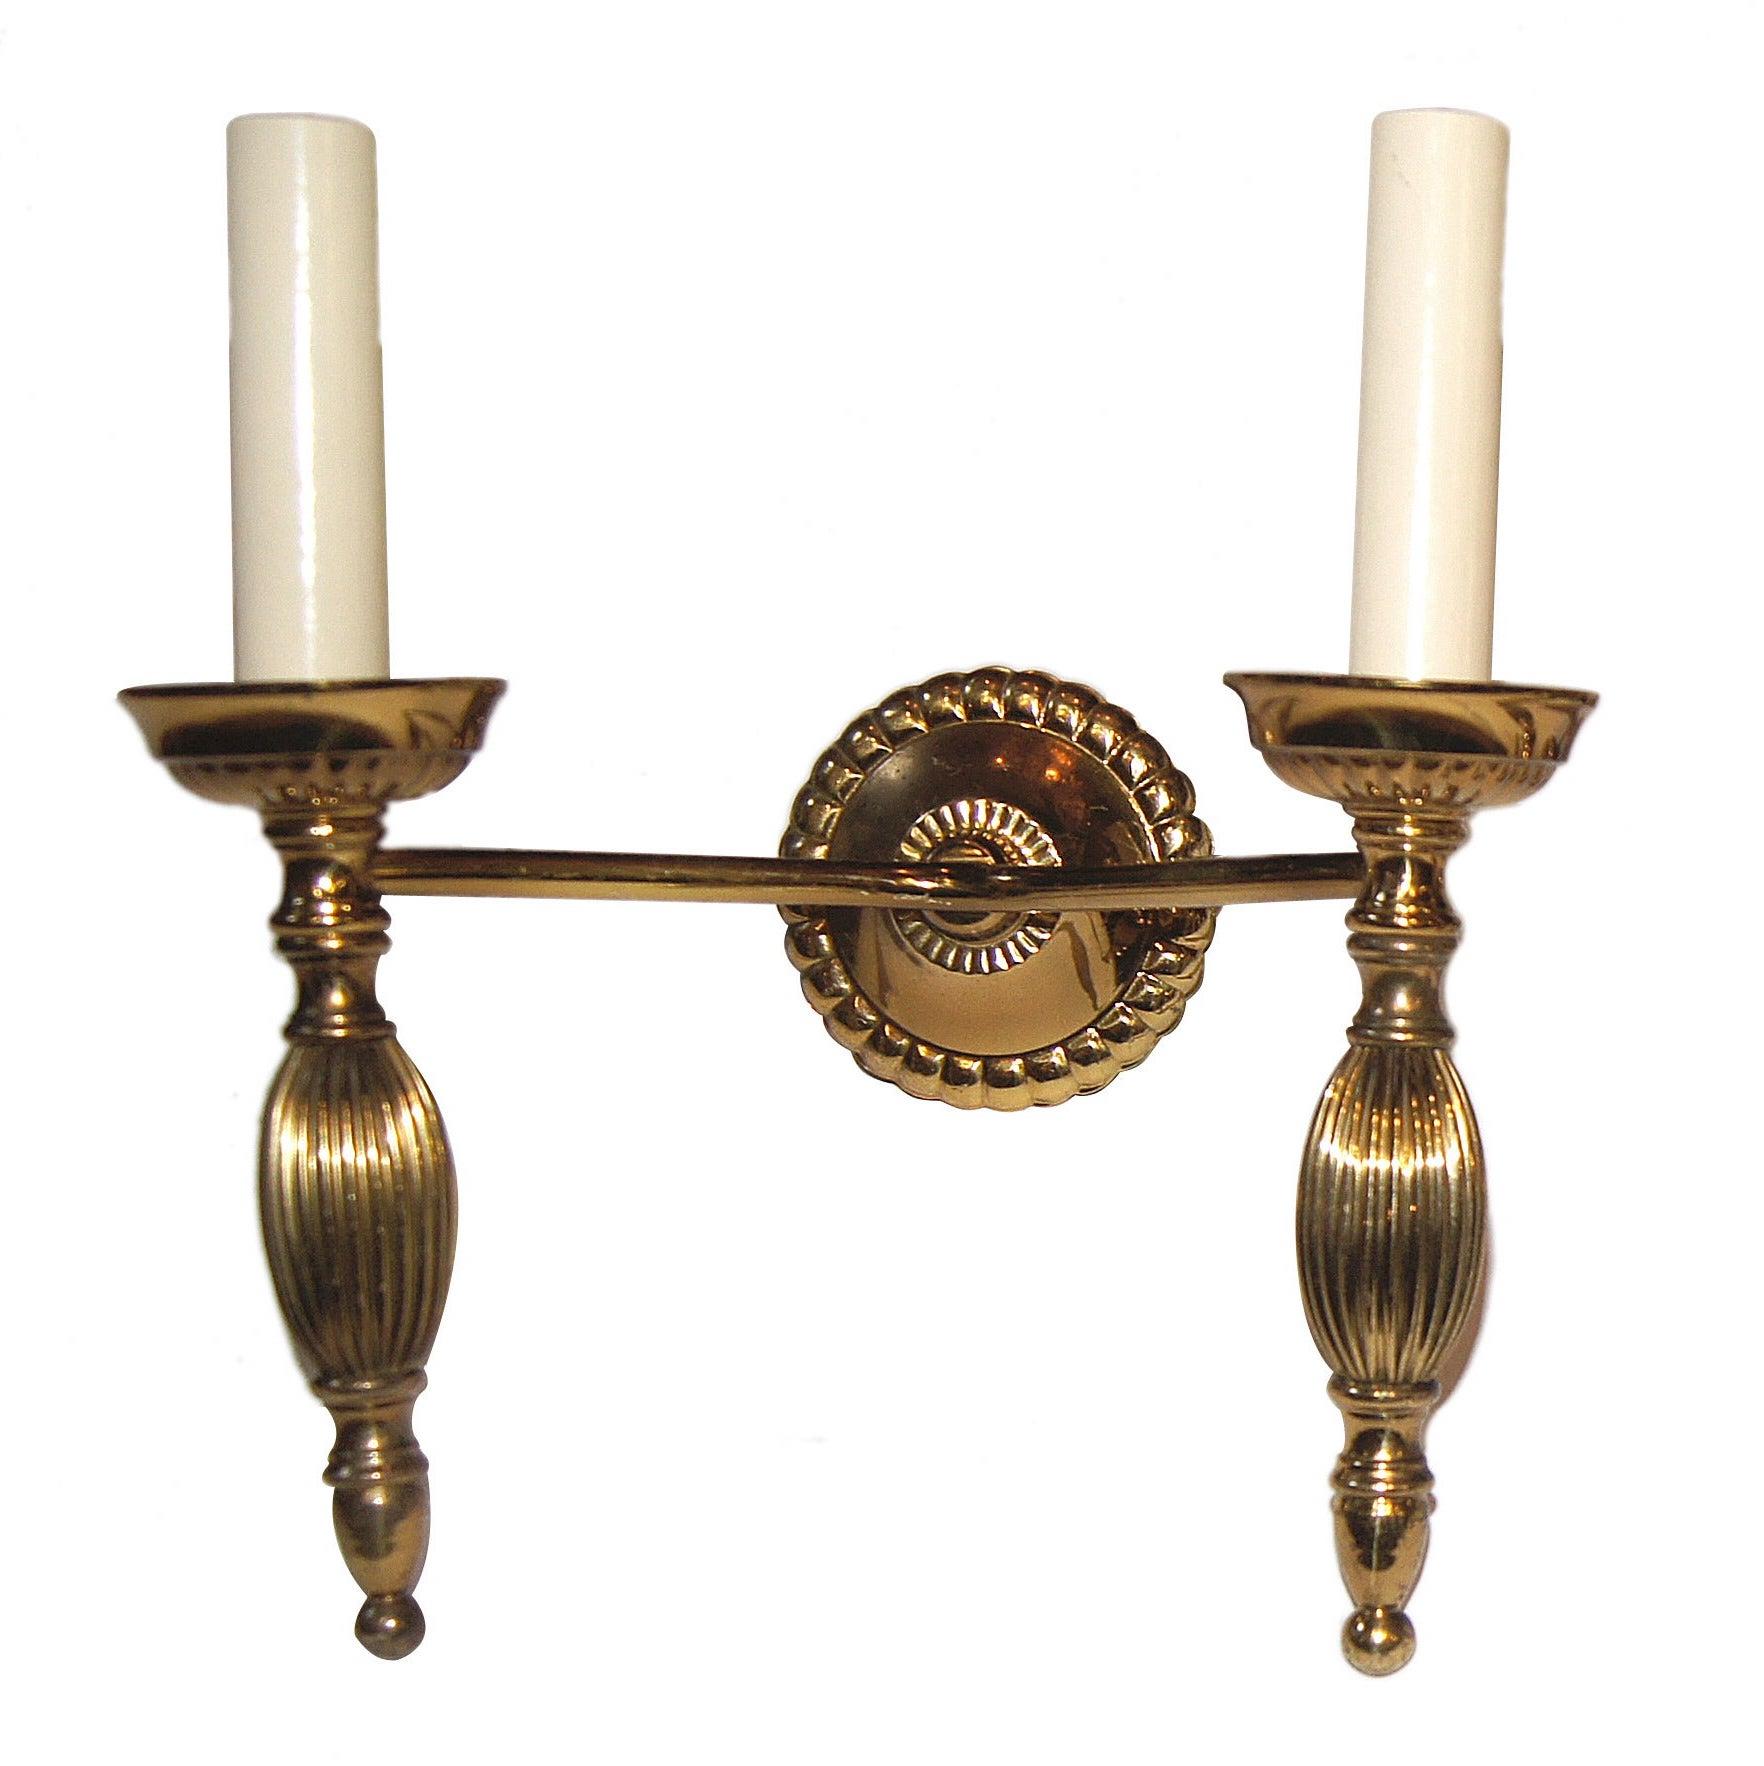 Set of eighteen circa 1940's Italian gilt metal two-arm sconces. Sold per pair.

Measurements:
Height: 9.5